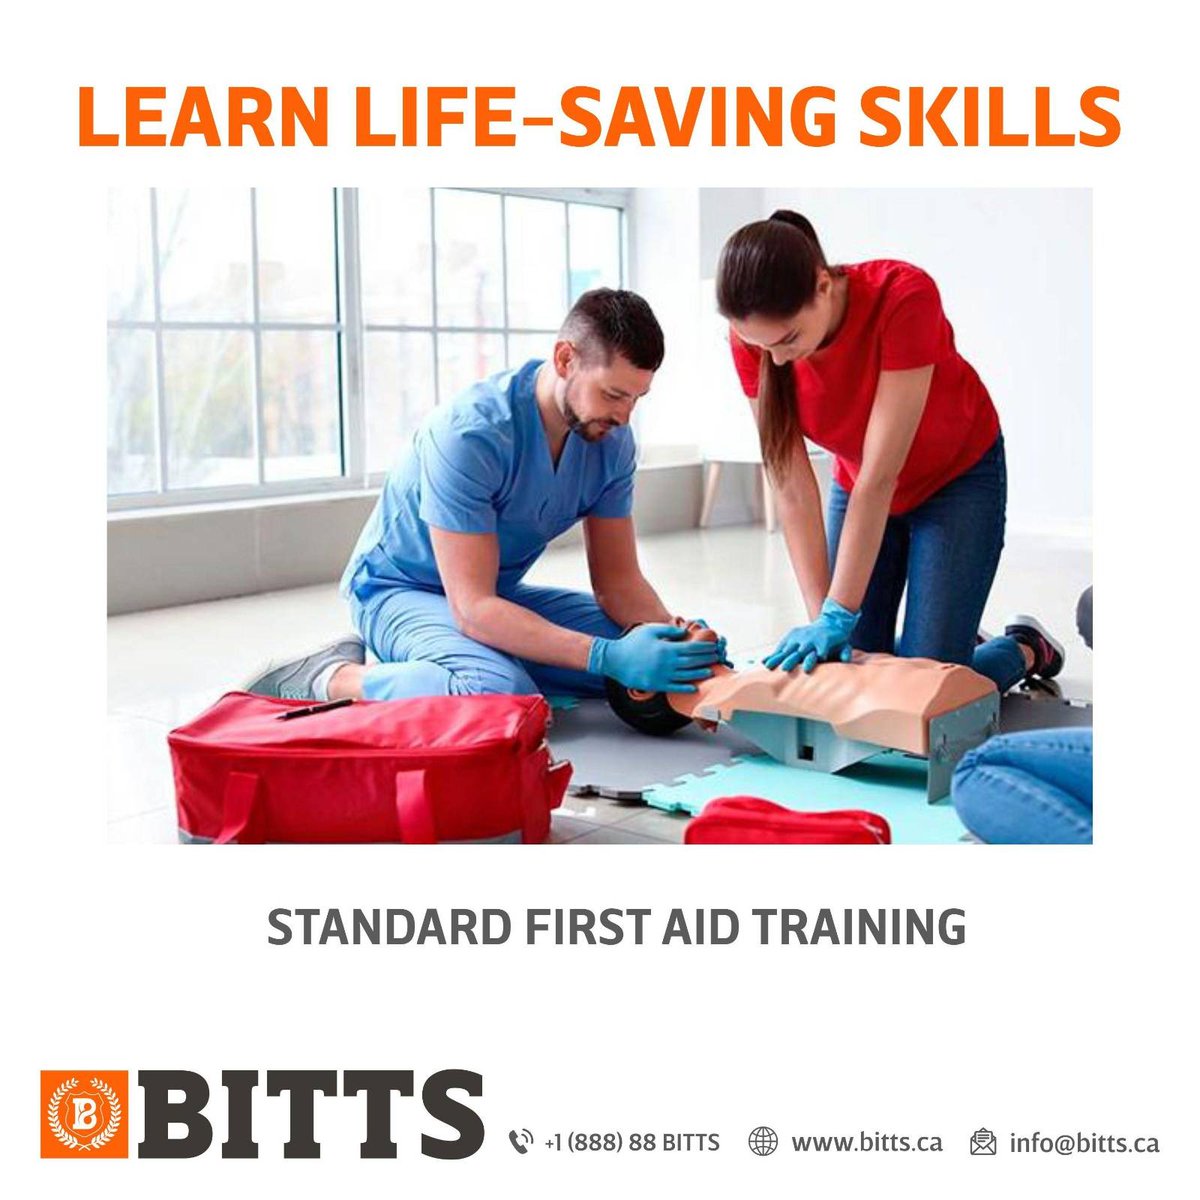 Be prepared for any emergency at your workplace with a Standard First Aid Training Course. Book Your Session Today: bitts.ca/red-cross-cert…
#certificationcourse #CPRTraining #standardfirstaid #firstaidtraining